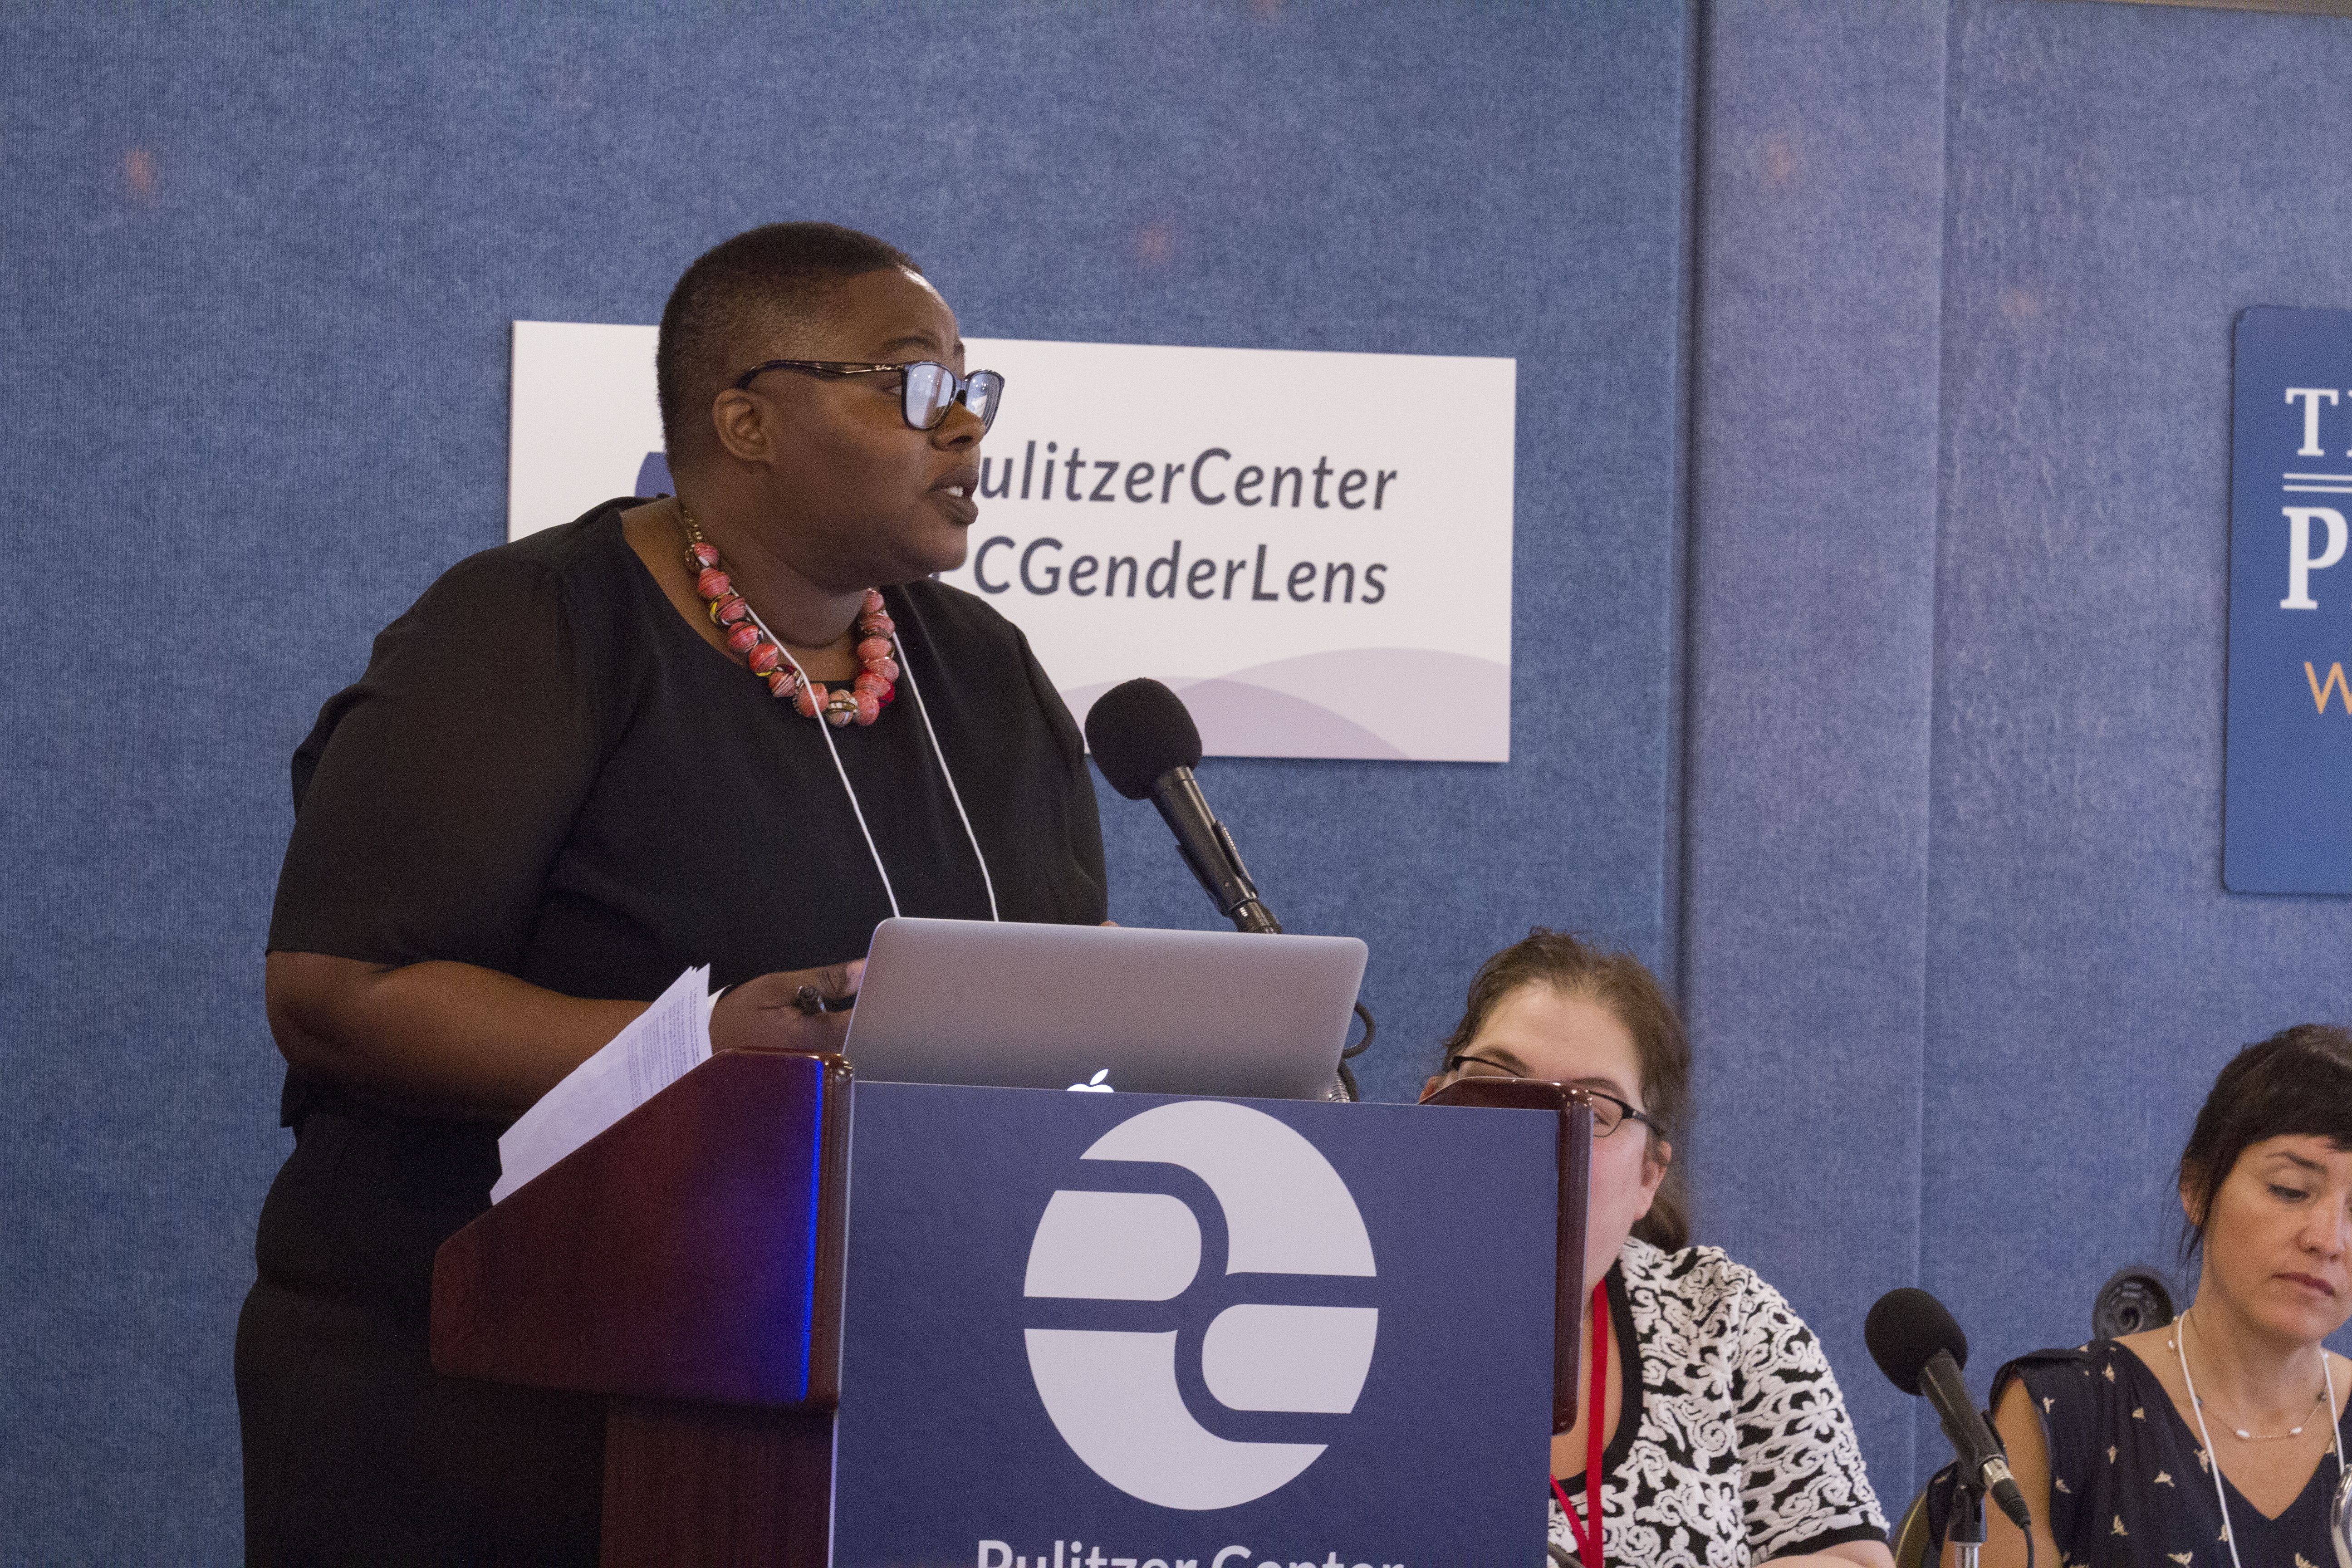 Caroline Kouassiaman talks about LGBTI health and sex ed initiatives in Kenya and Liberia at the Pulitzer Center Gender Lens Conference. Image by Jin Ding. United States, 2017. 